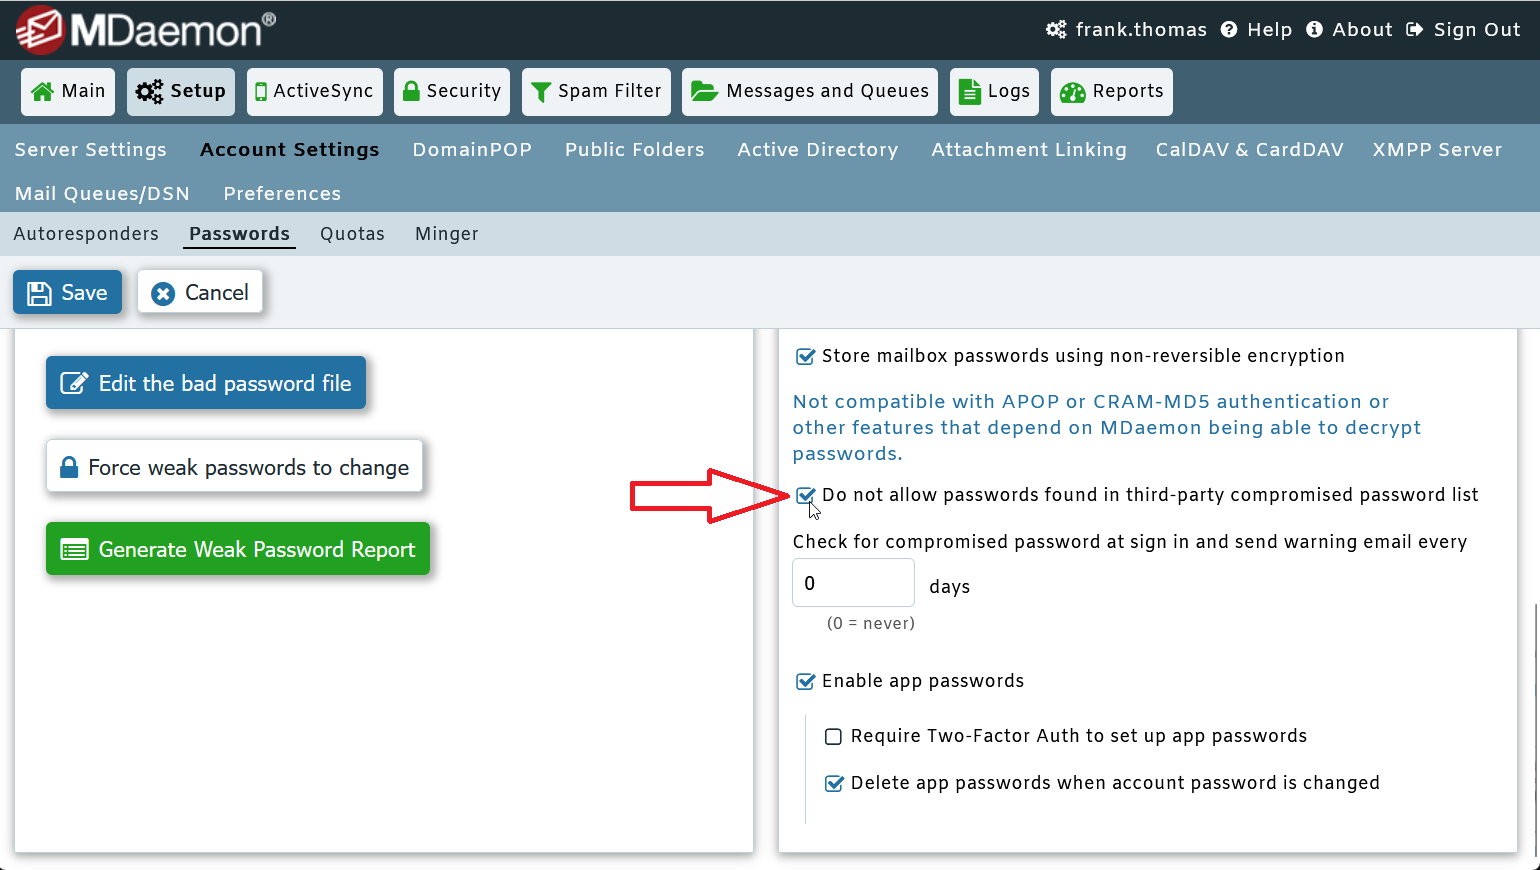 Compromised password check in MDaemon Email Server